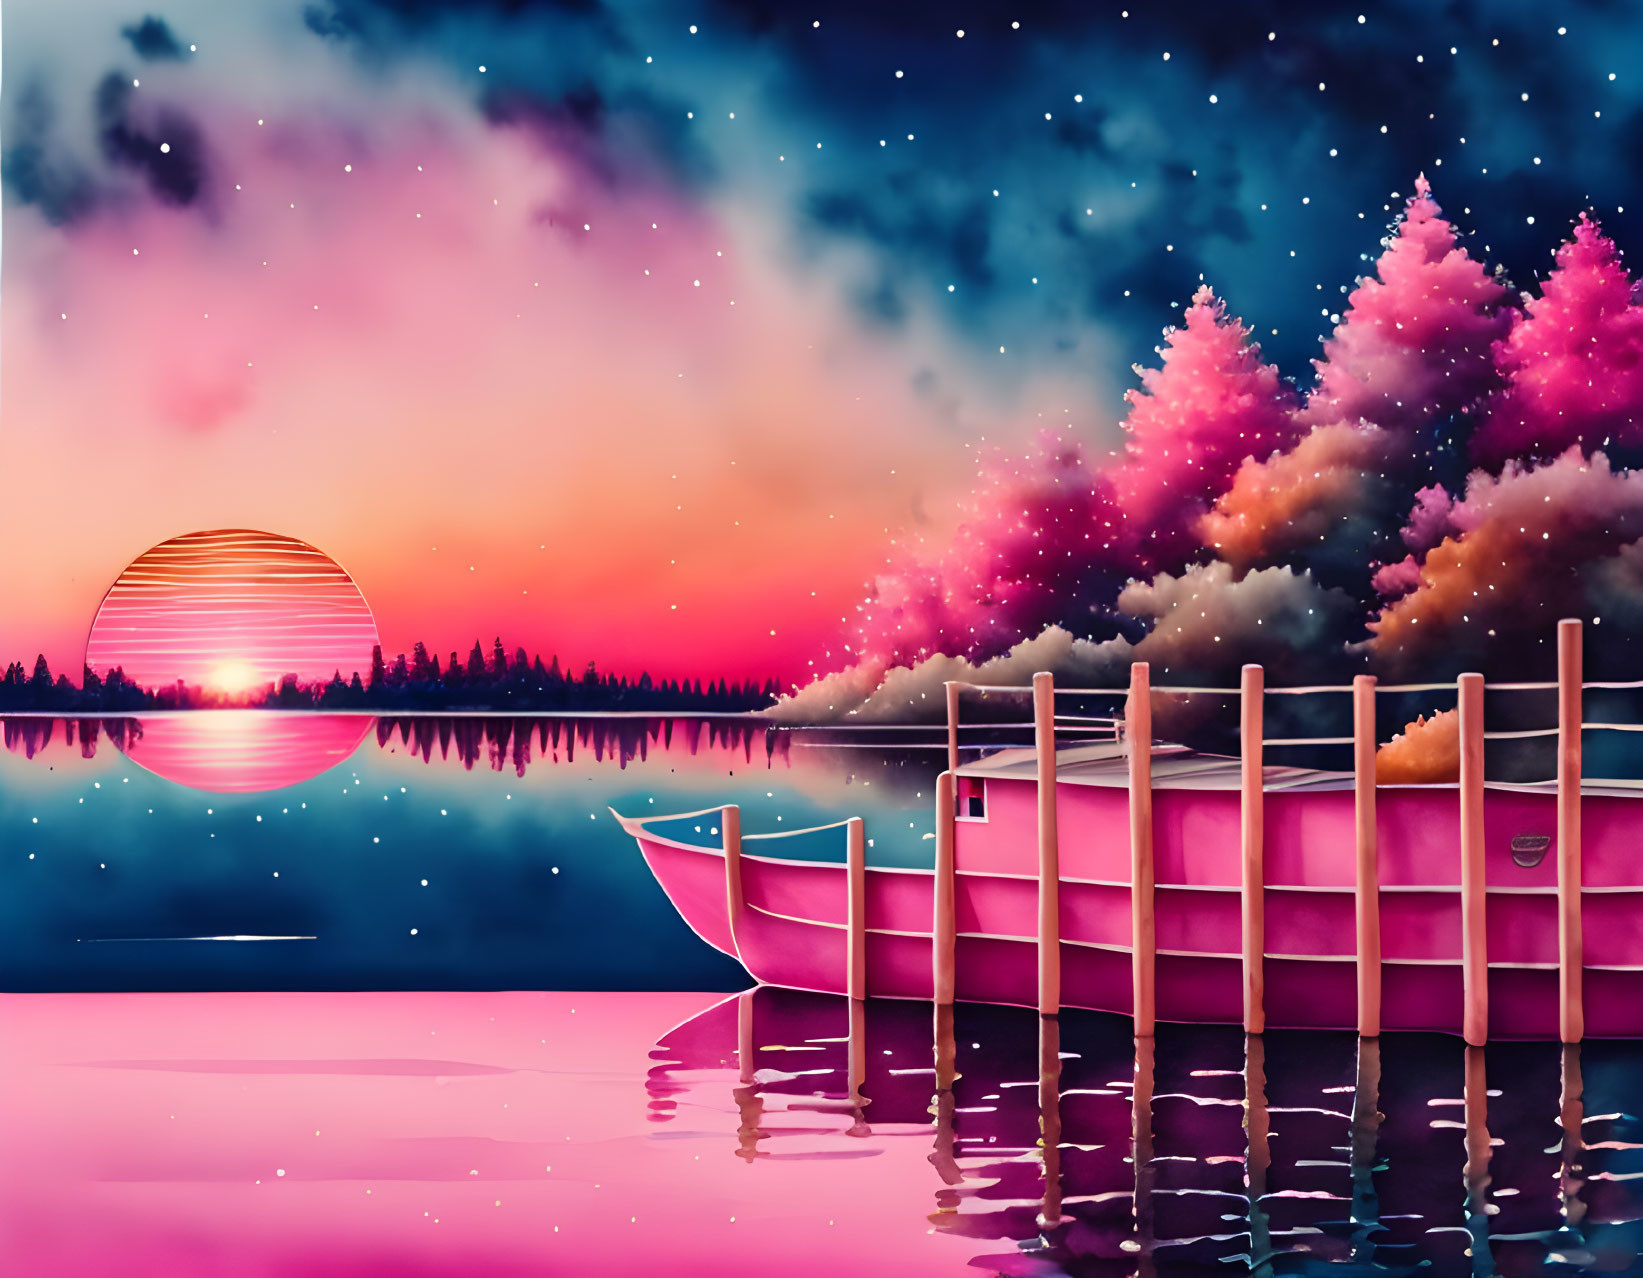 Surreal sunset digital artwork with pink lake, boat silhouette, trees, and starry sky.